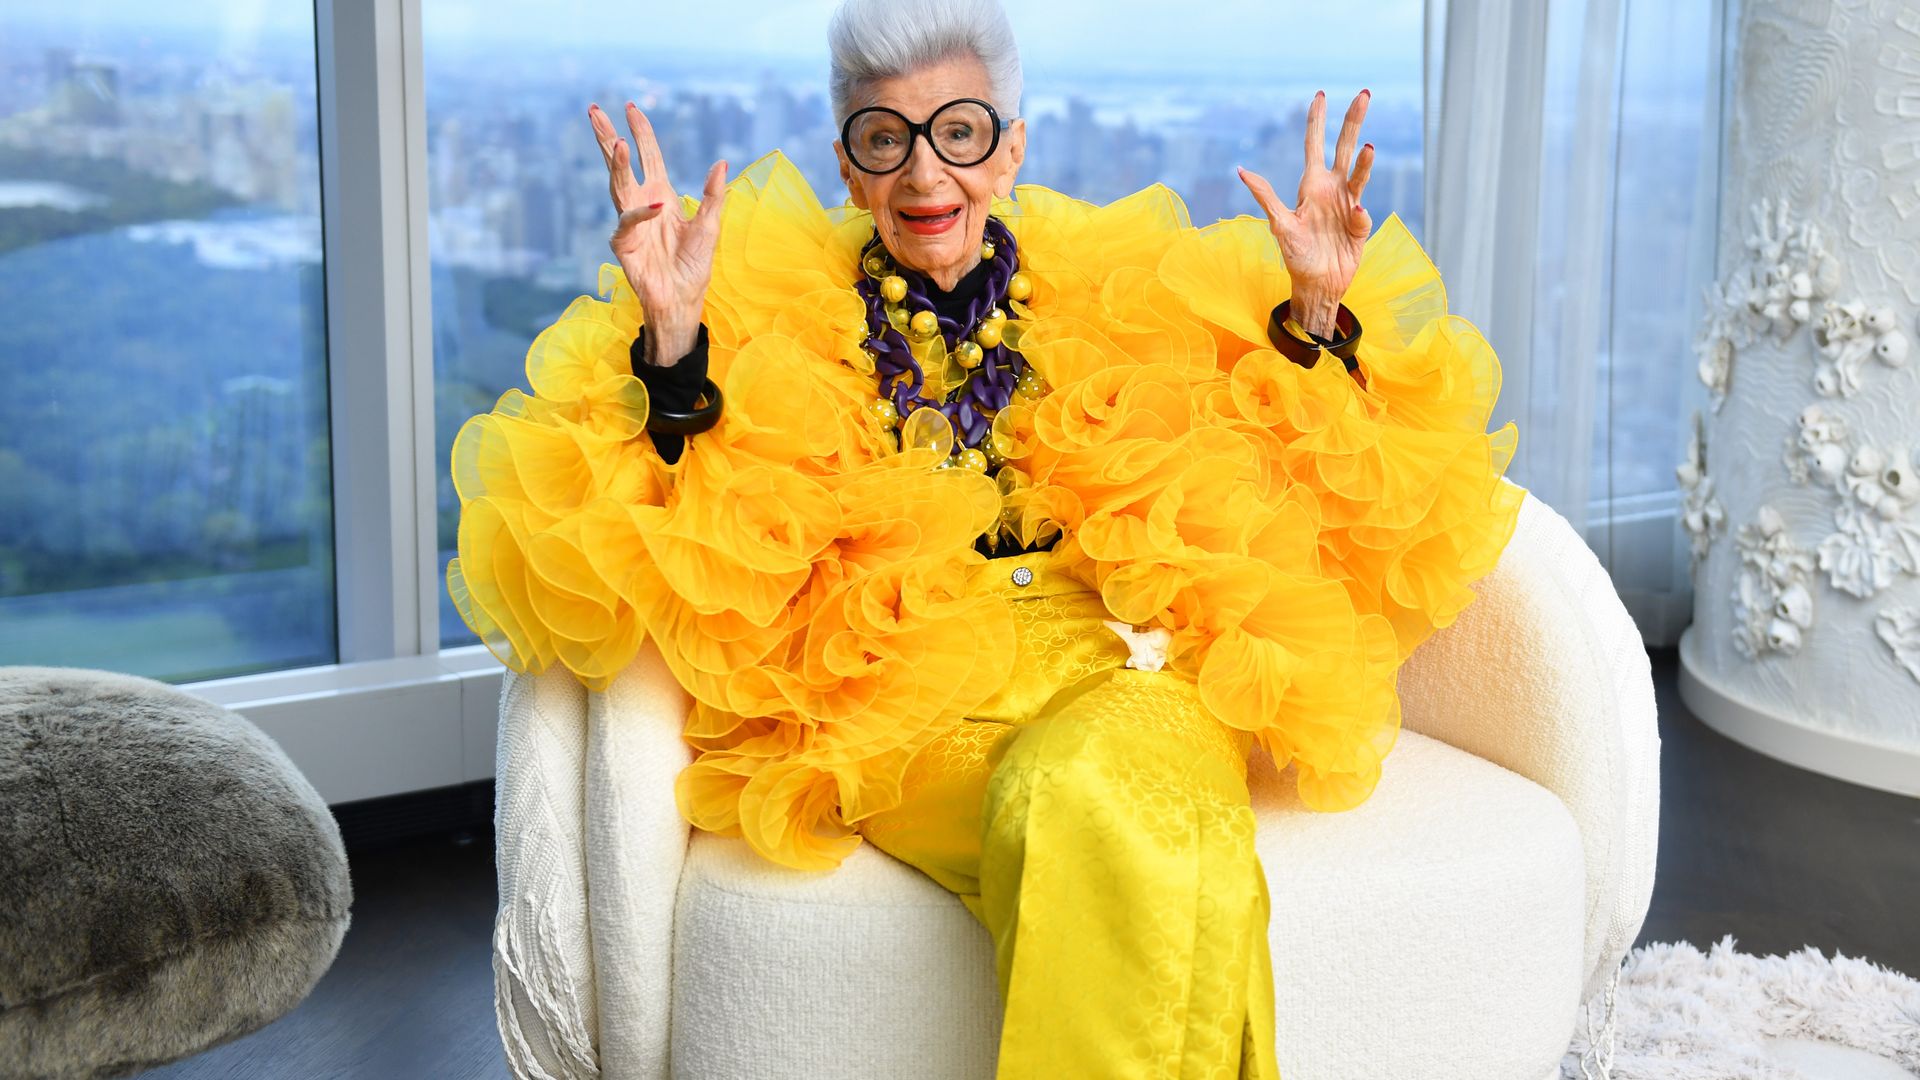 Iris Apfel dies aged 102: tributes pour in from Lenny Kravitz, Lily Collins and more